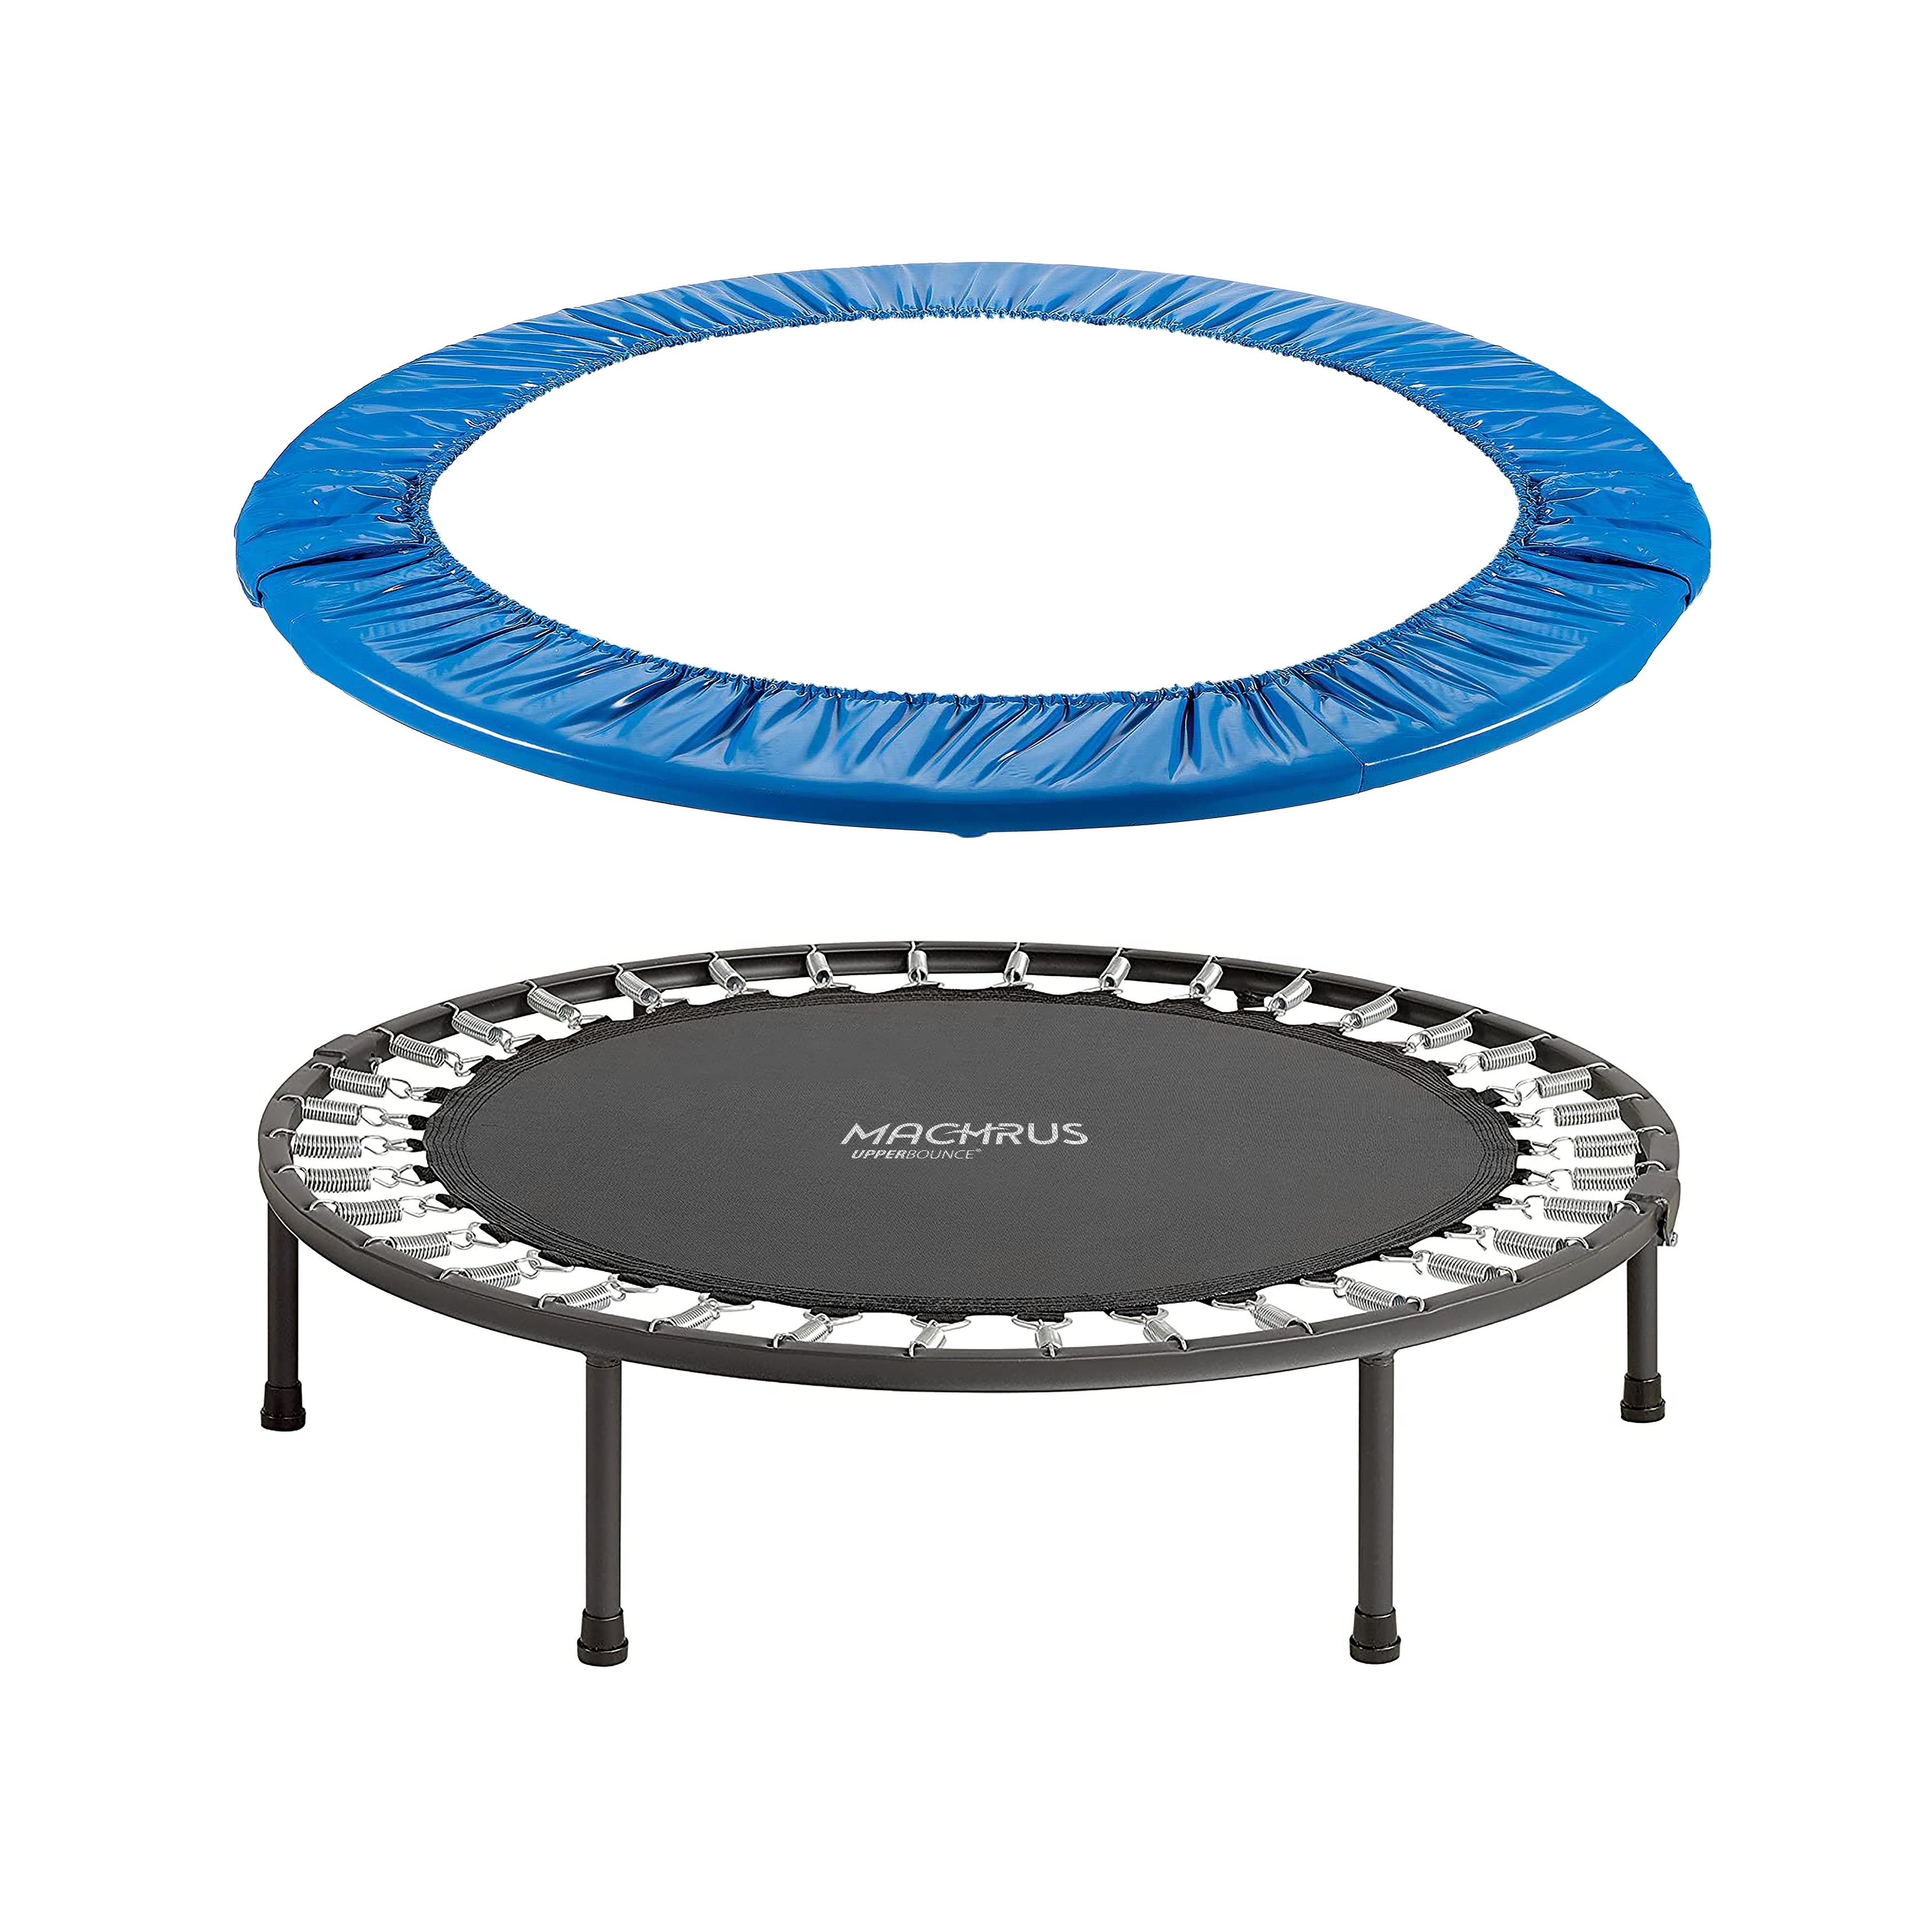 Upper Bounce Trampolines - Bed Bath & Beyond